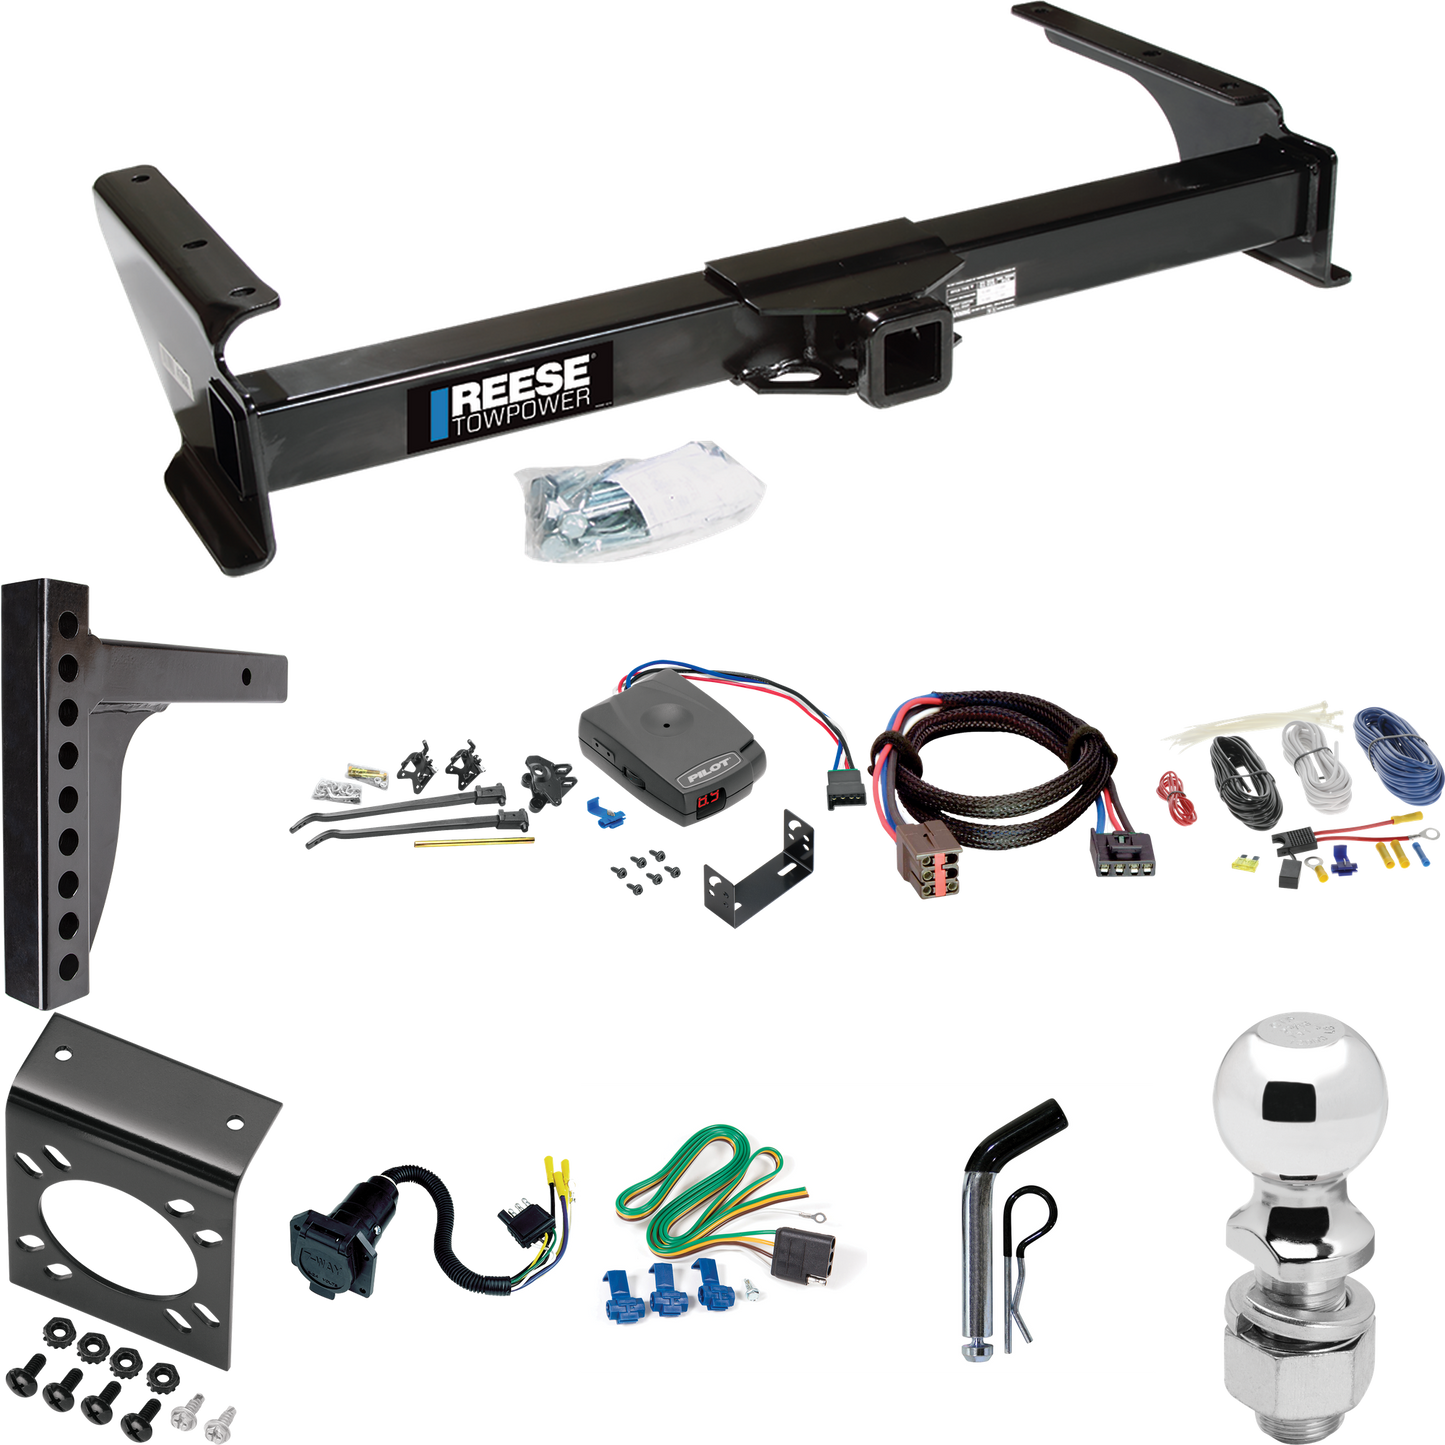 Fits 2003-2007 Ford E-250 Econoline Trailer Hitch Tow PKG w/ 12K Trunnion Bar Weight Distribution Hitch + Pin/Clip + 2-5/16" Ball + Pro Series Pilot Brake Control + Plug & Play BC Adapter + 7-Way RV Wiring By Reese Towpower